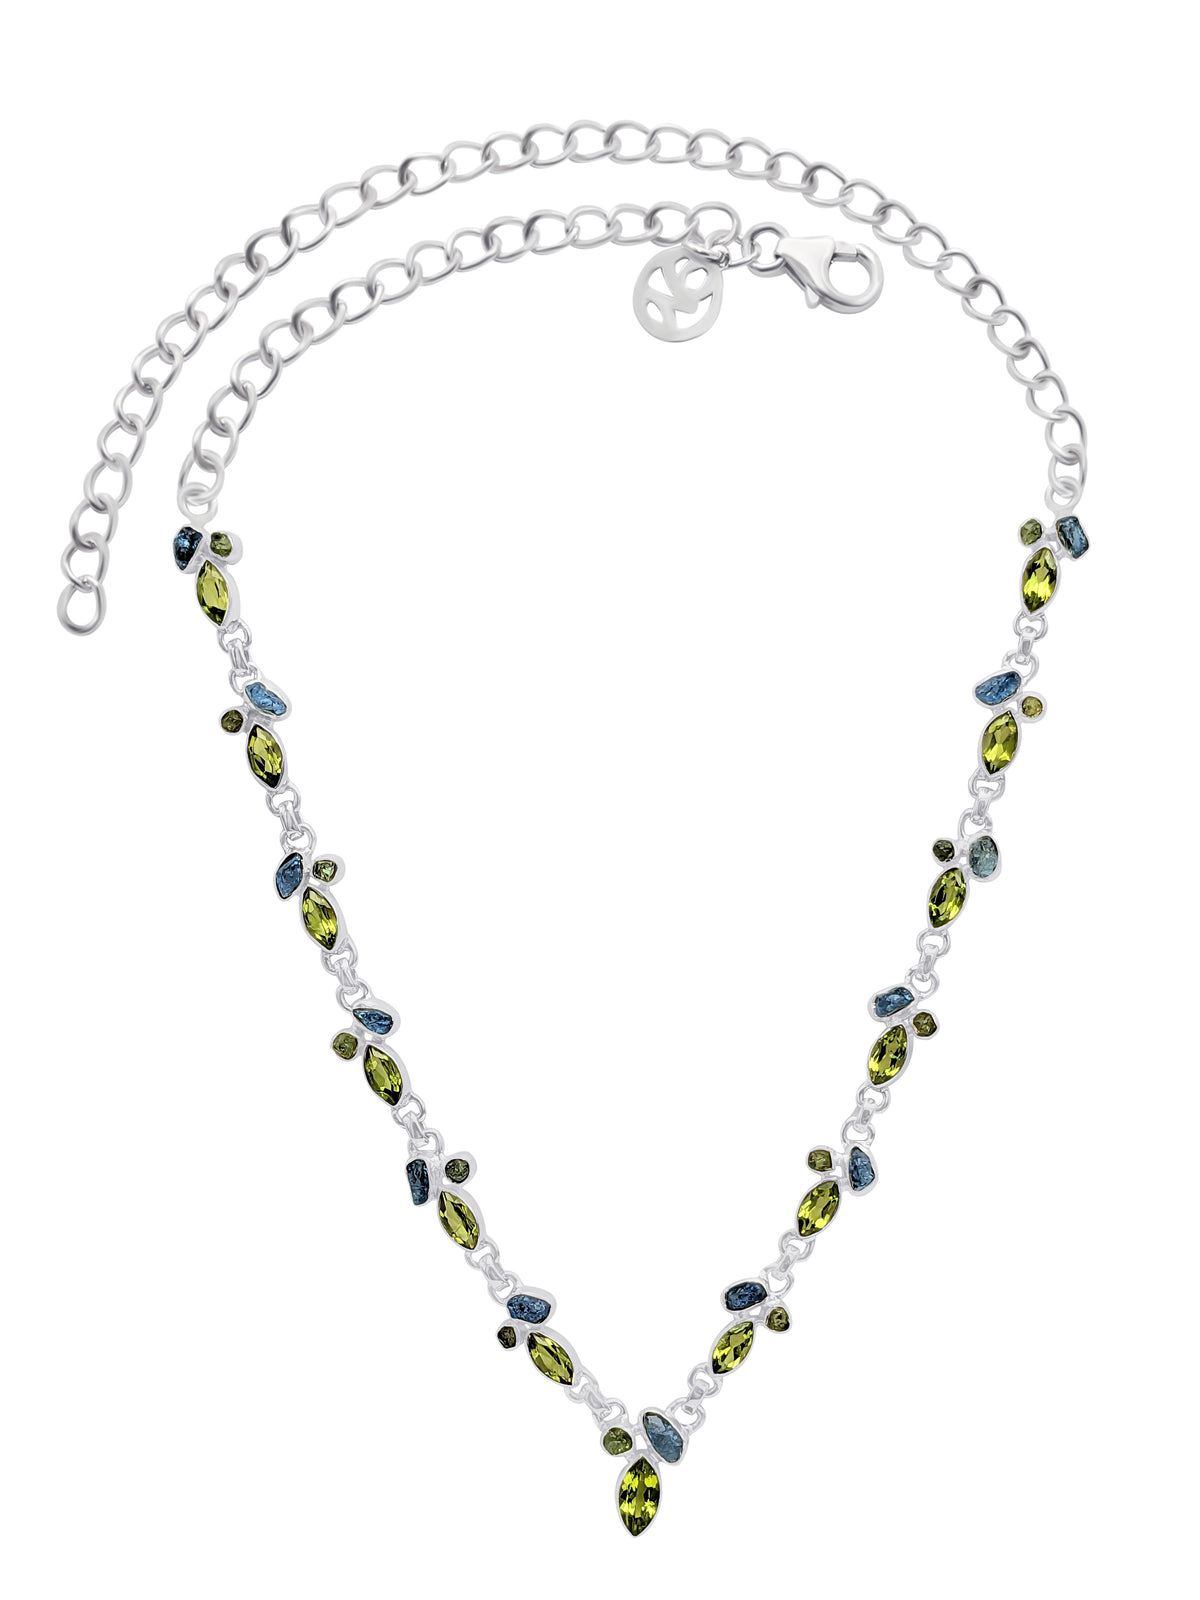 Designer Peridot Necklace Studded With Green Tourmaline Aquamarine Pack of 1 (D70-1)